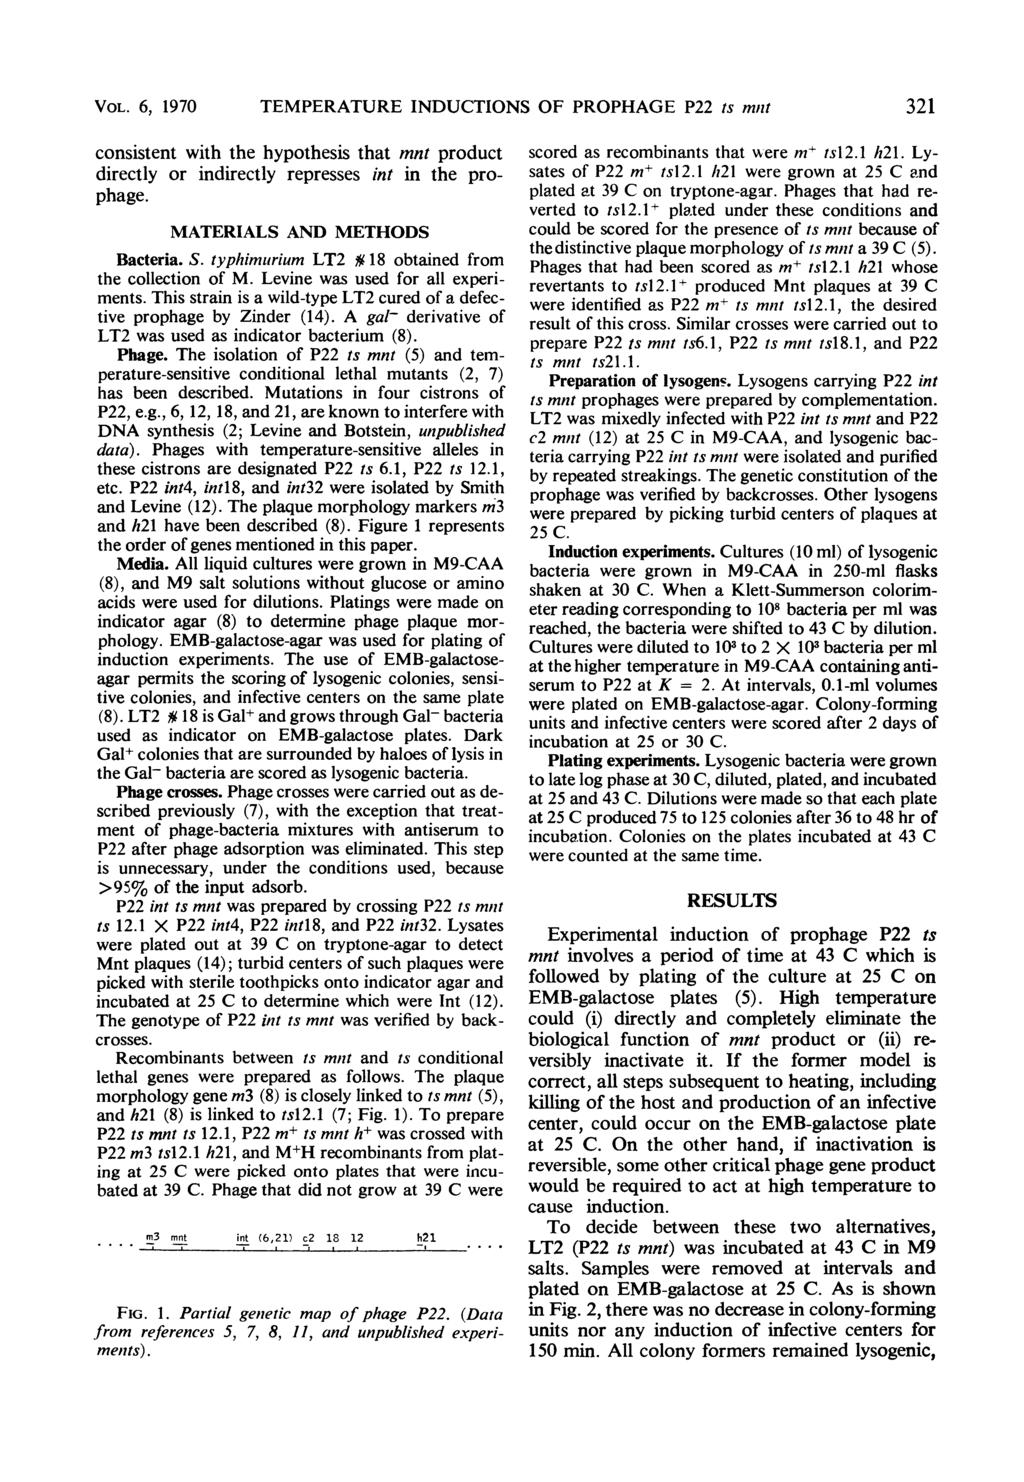 VOL. 6, 1970 TEMPERATURE INDUCTIONS OF PROPHAGE P22 ts miet 321 consistent with the hypothesis that mnt product directly or indirectly represses int in the prophage. MATERIALS AND METHODS Bacteria. S.